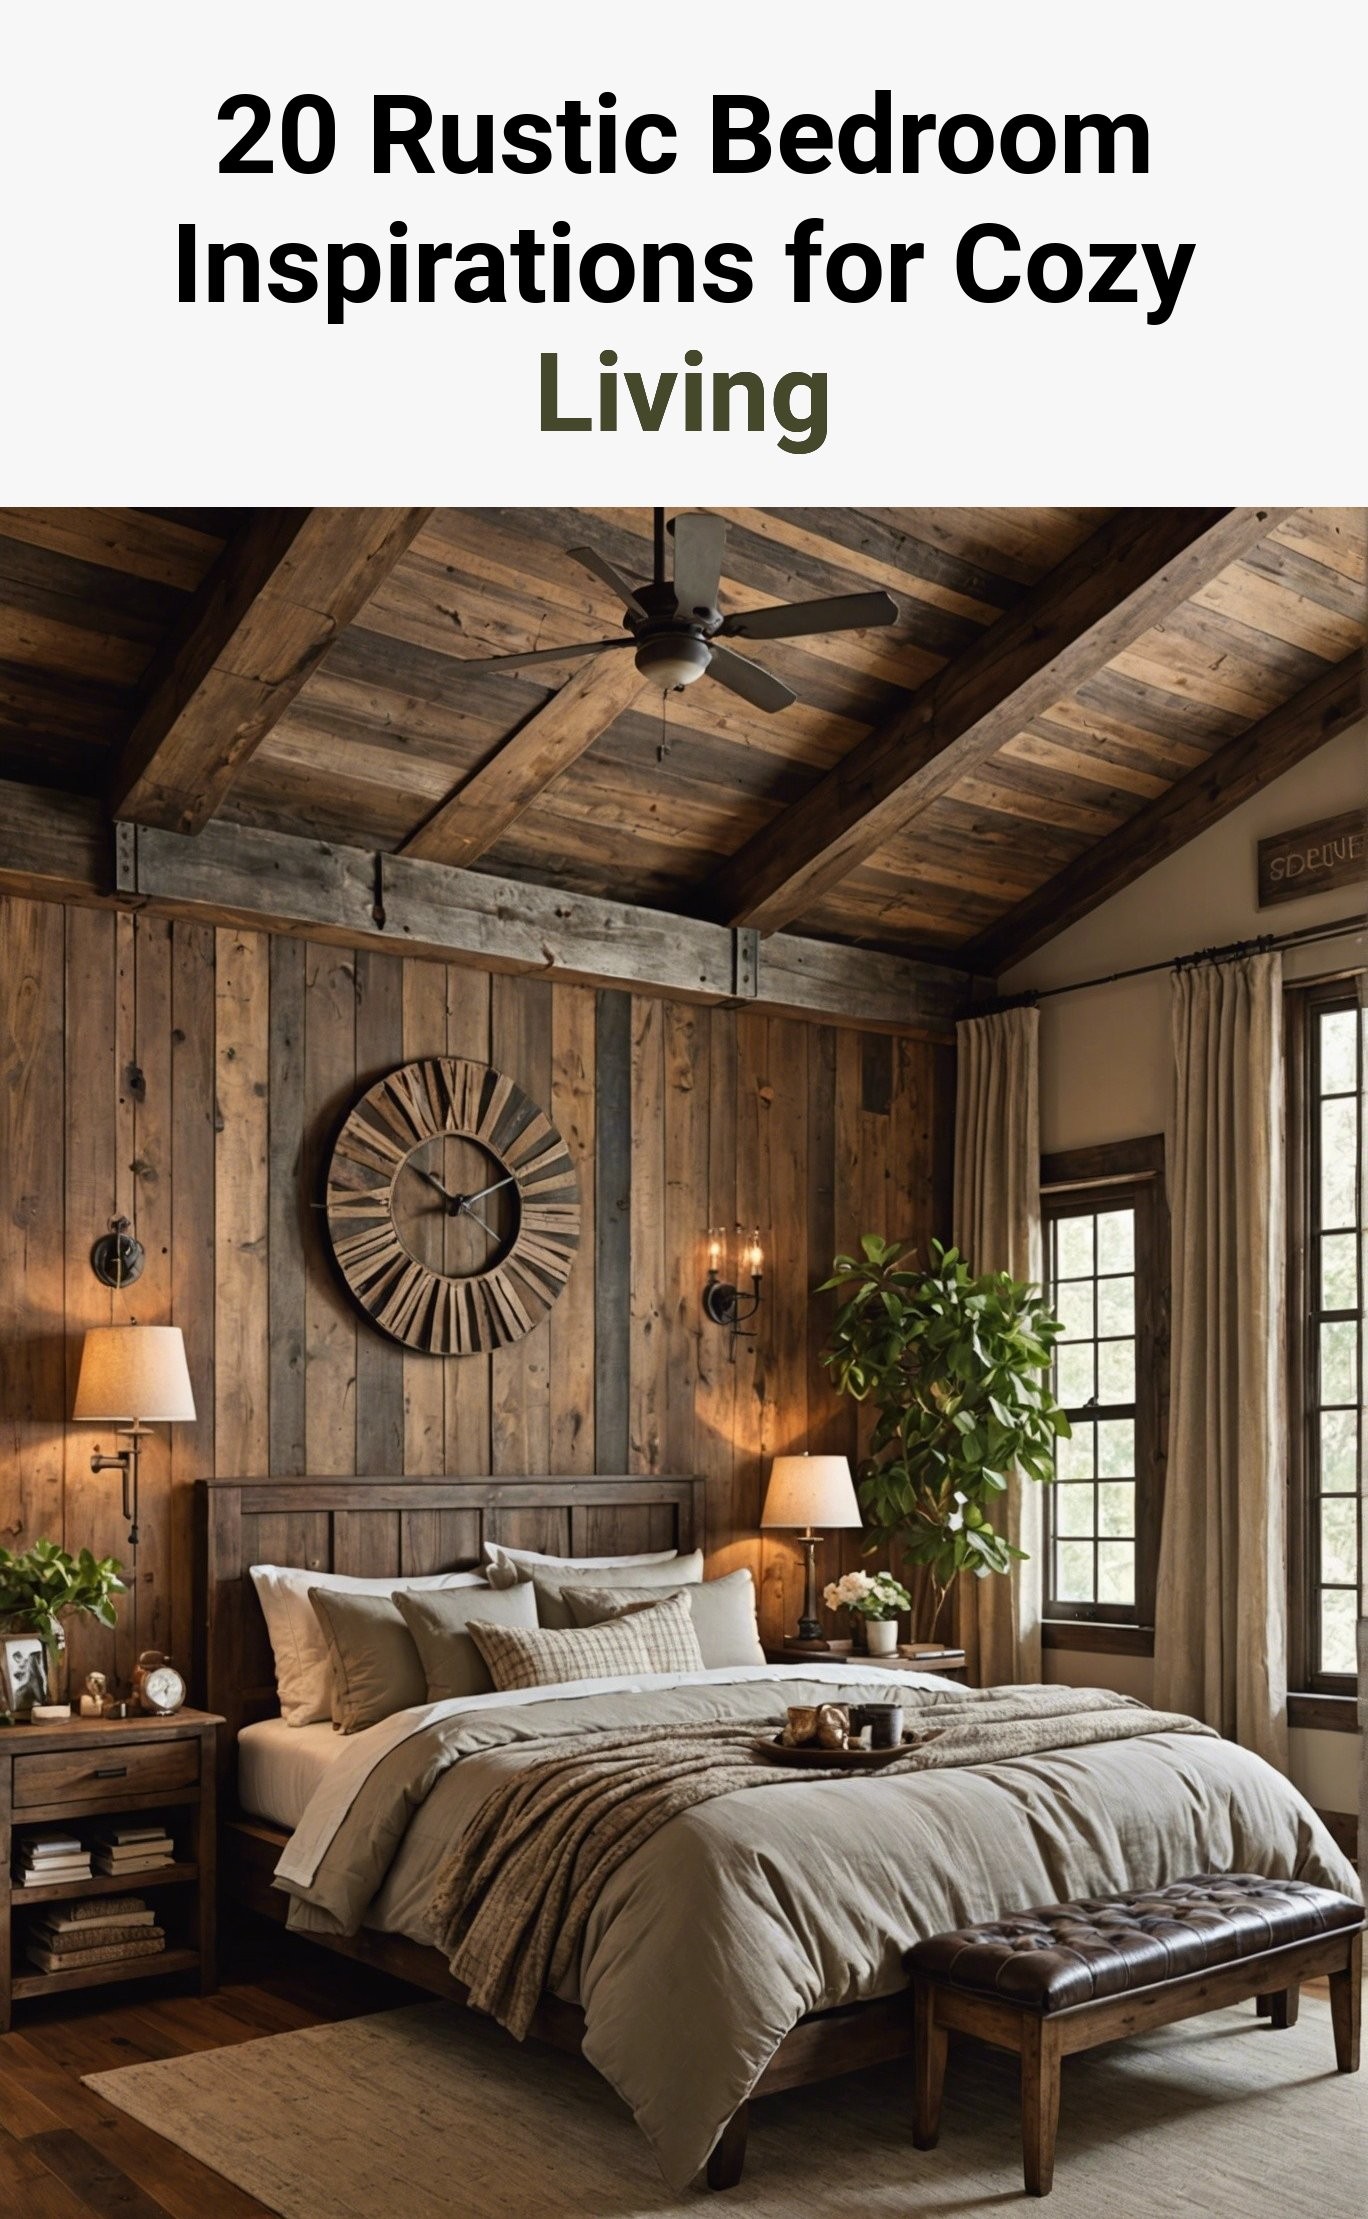 20 Rustic Bedroom Inspirations for Cozy Living